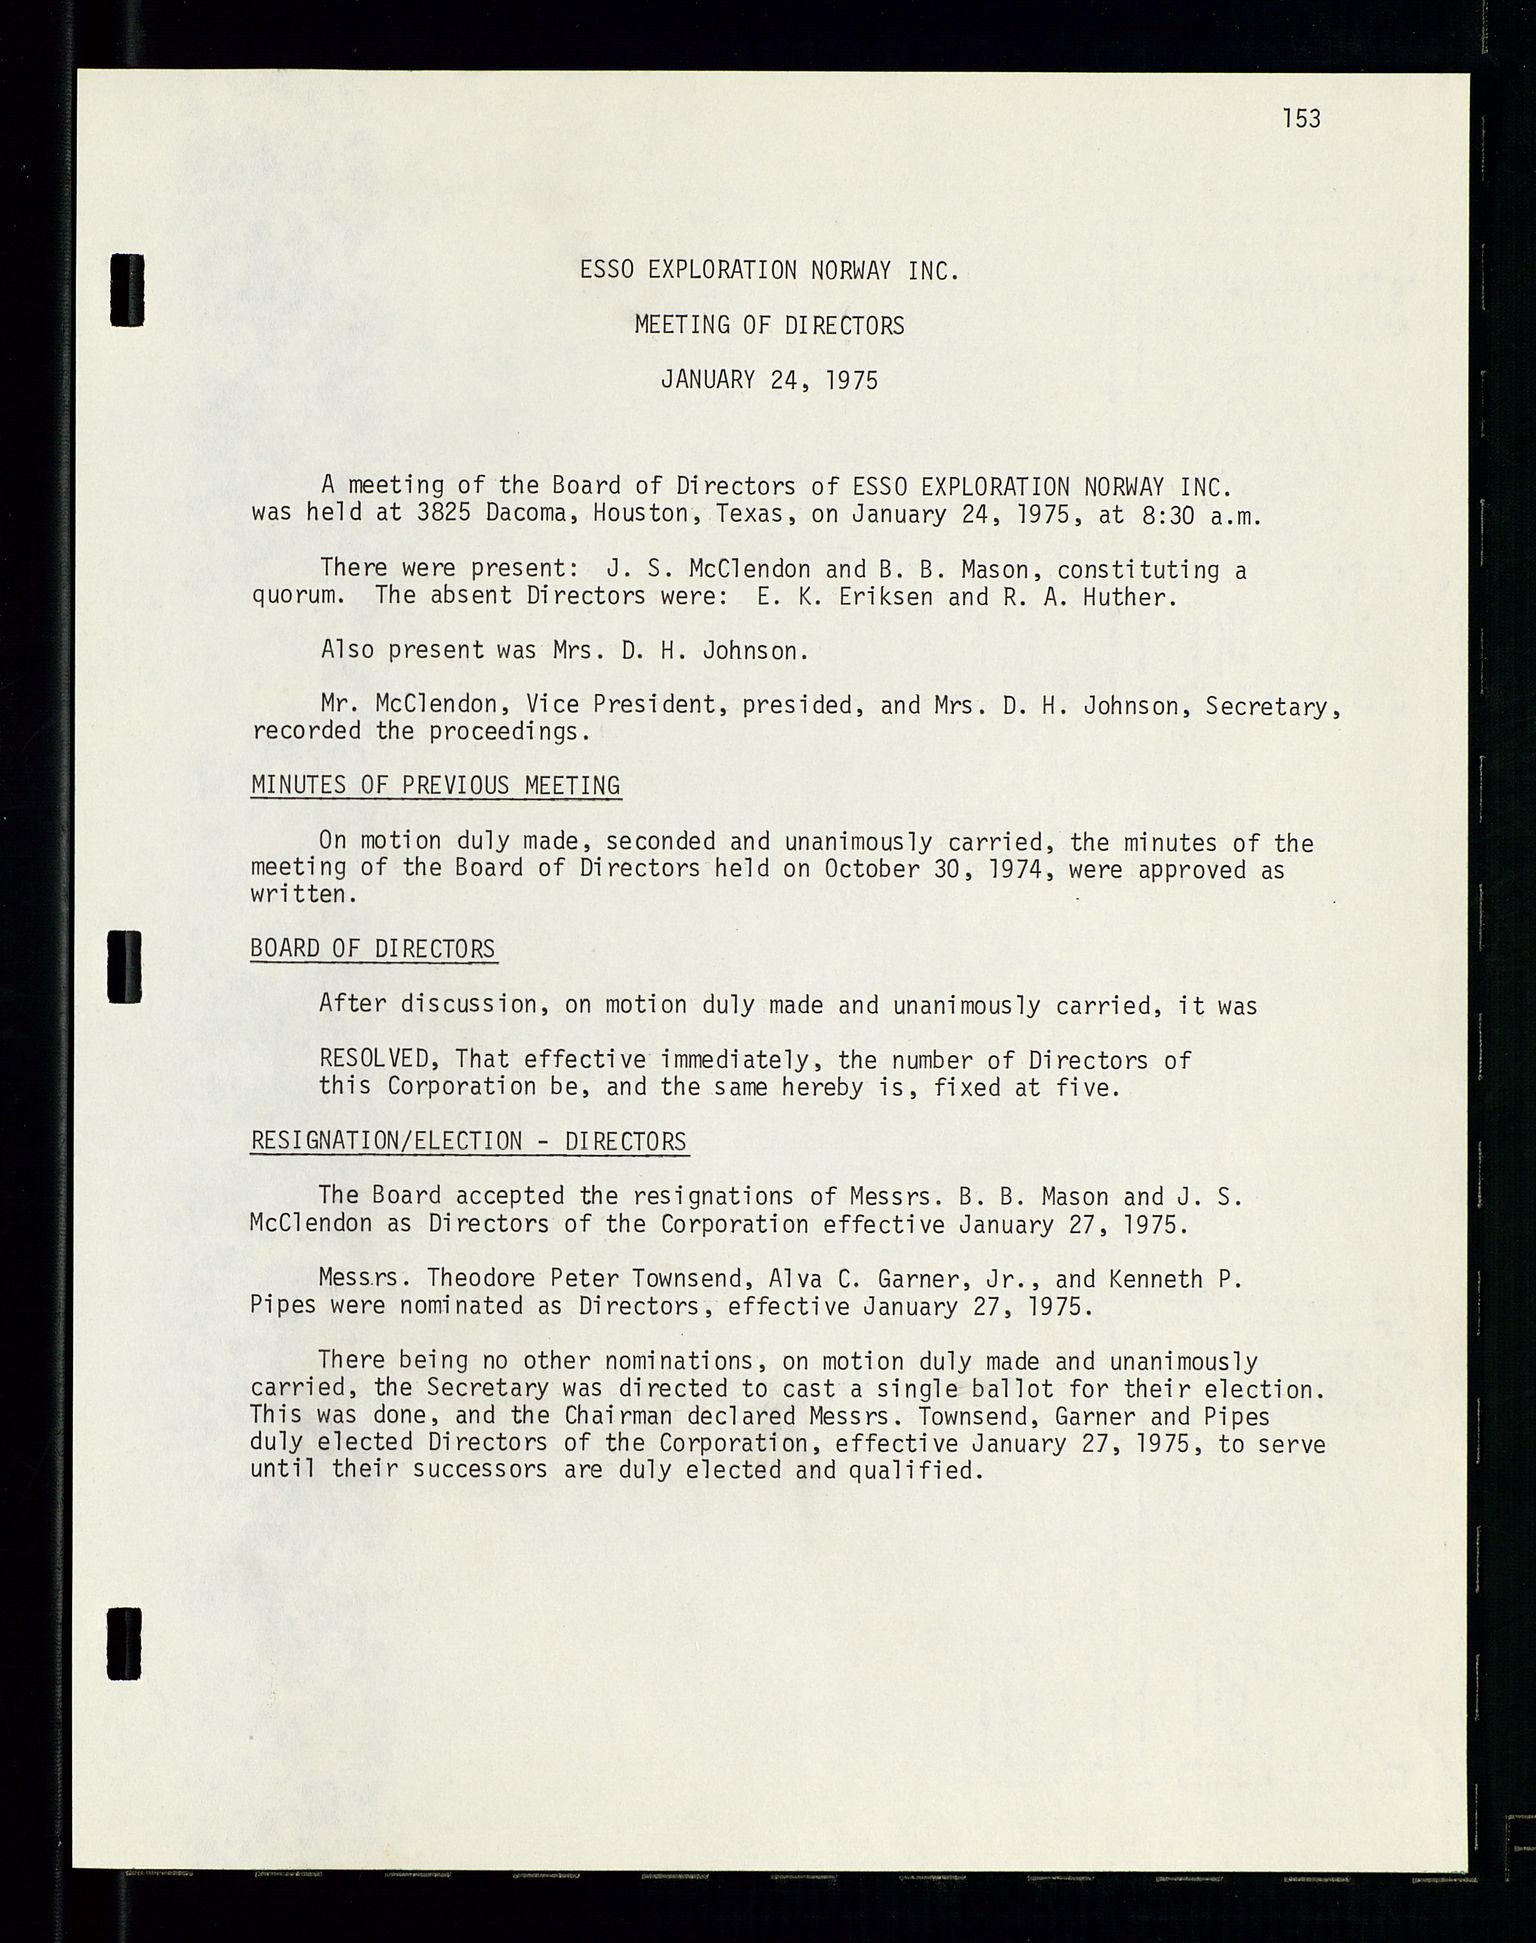 Pa 1512 - Esso Exploration and Production Norway Inc., SAST/A-101917/A/Aa/L0001/0001: Styredokumenter / Corporate records, By-Laws, Board meeting minutes, Incorporations, 1965-1975, s. 153